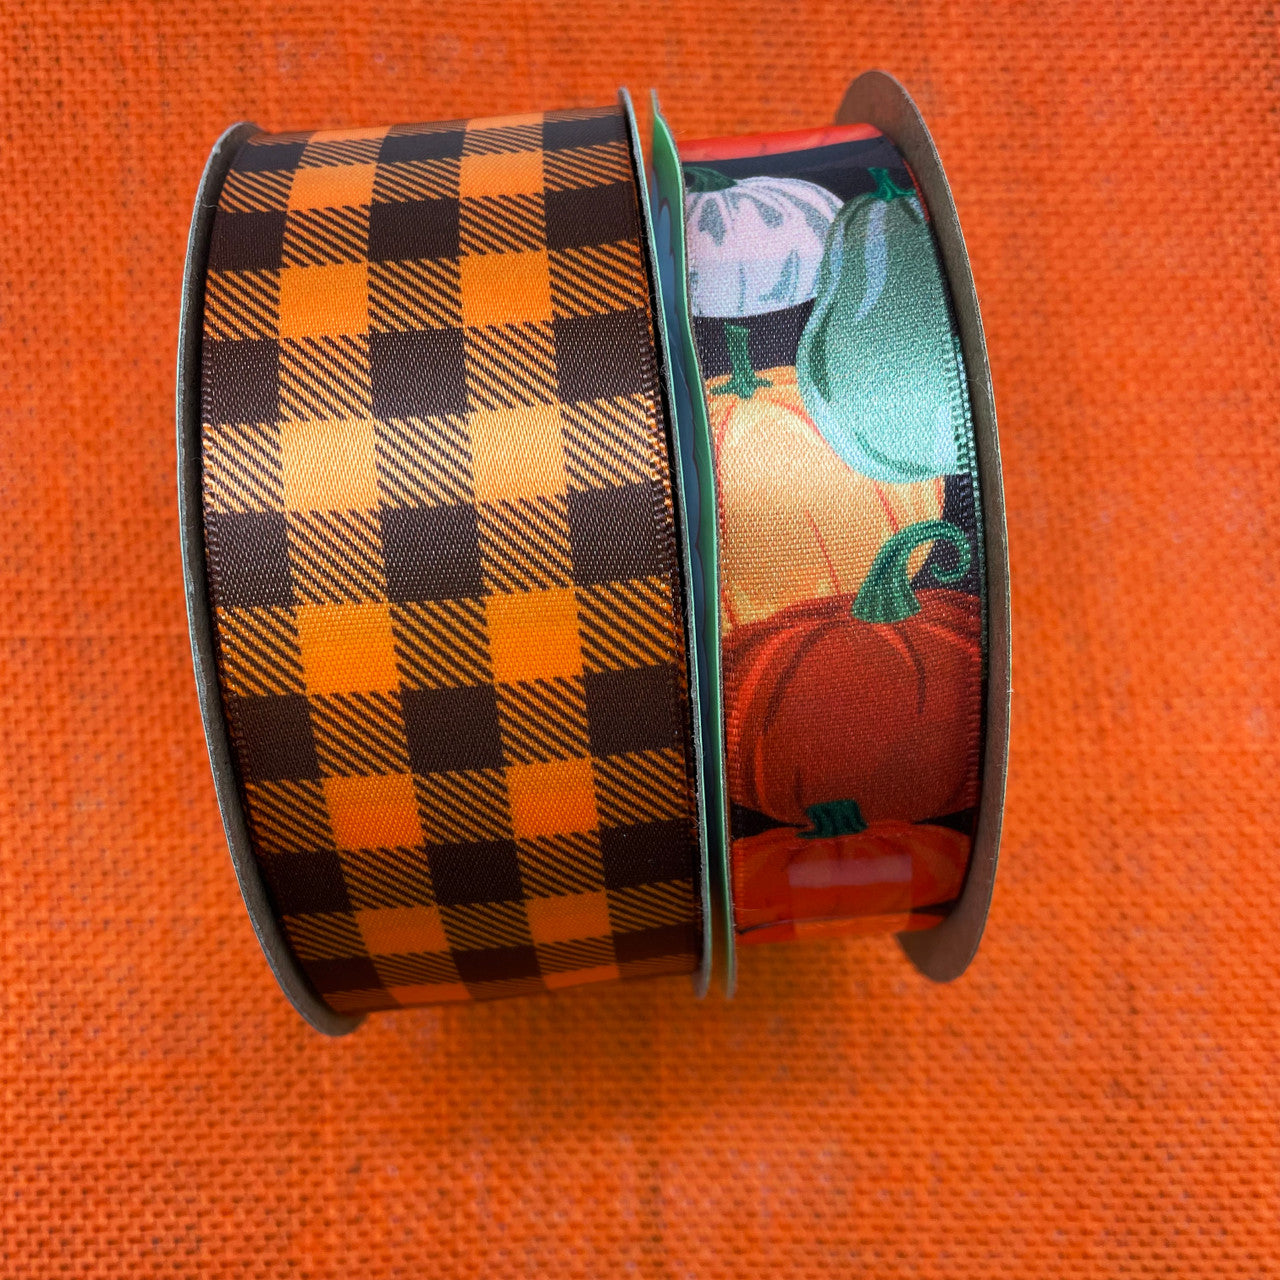 Mix and match this ribbon with our 1.5" brown and tangerine gingham check ribbon for fun Fall wreaths!